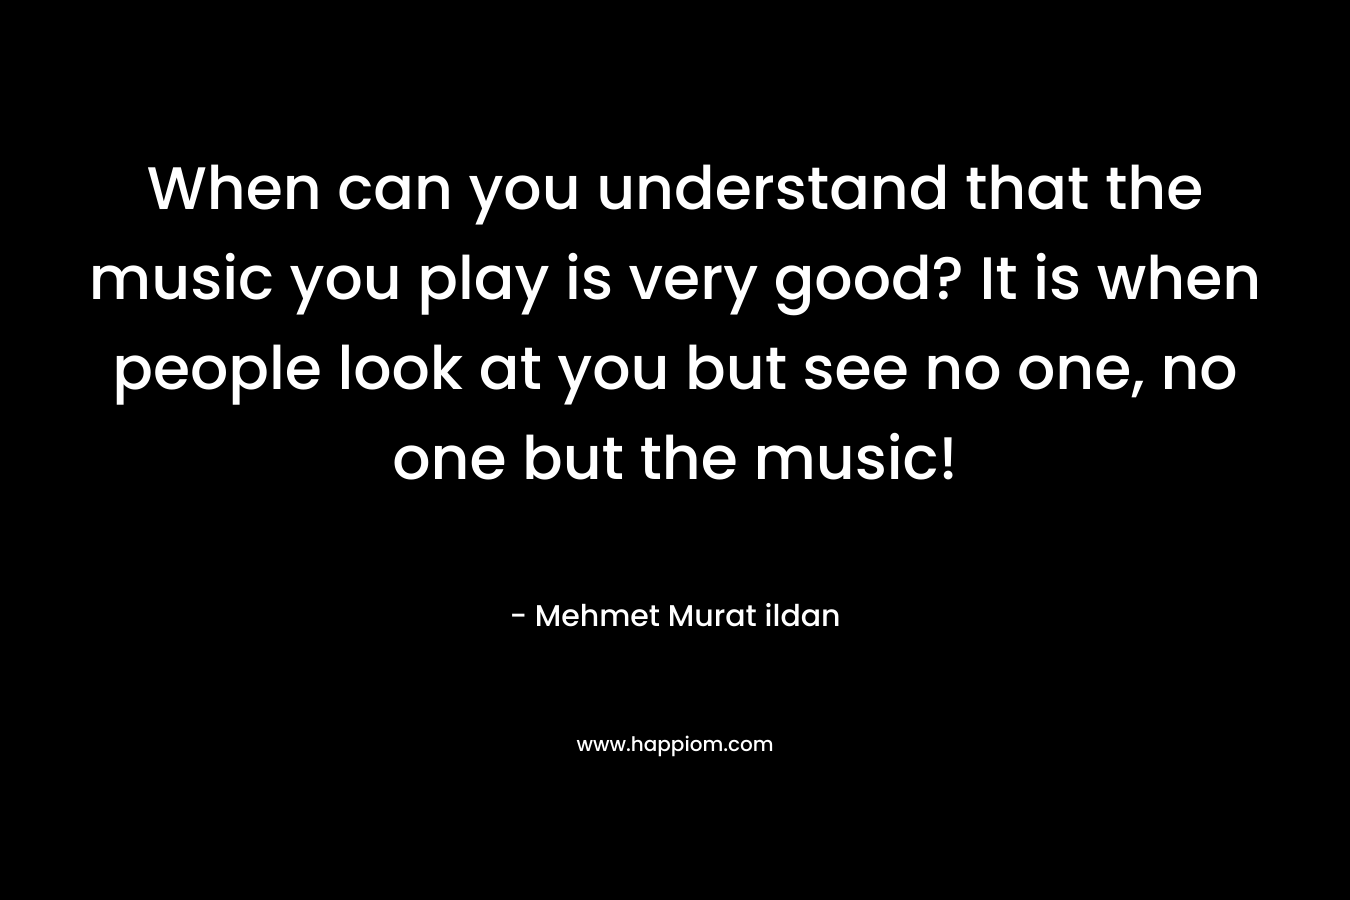 When can you understand that the music you play is very good? It is when people look at you but see no one, no one but the music!